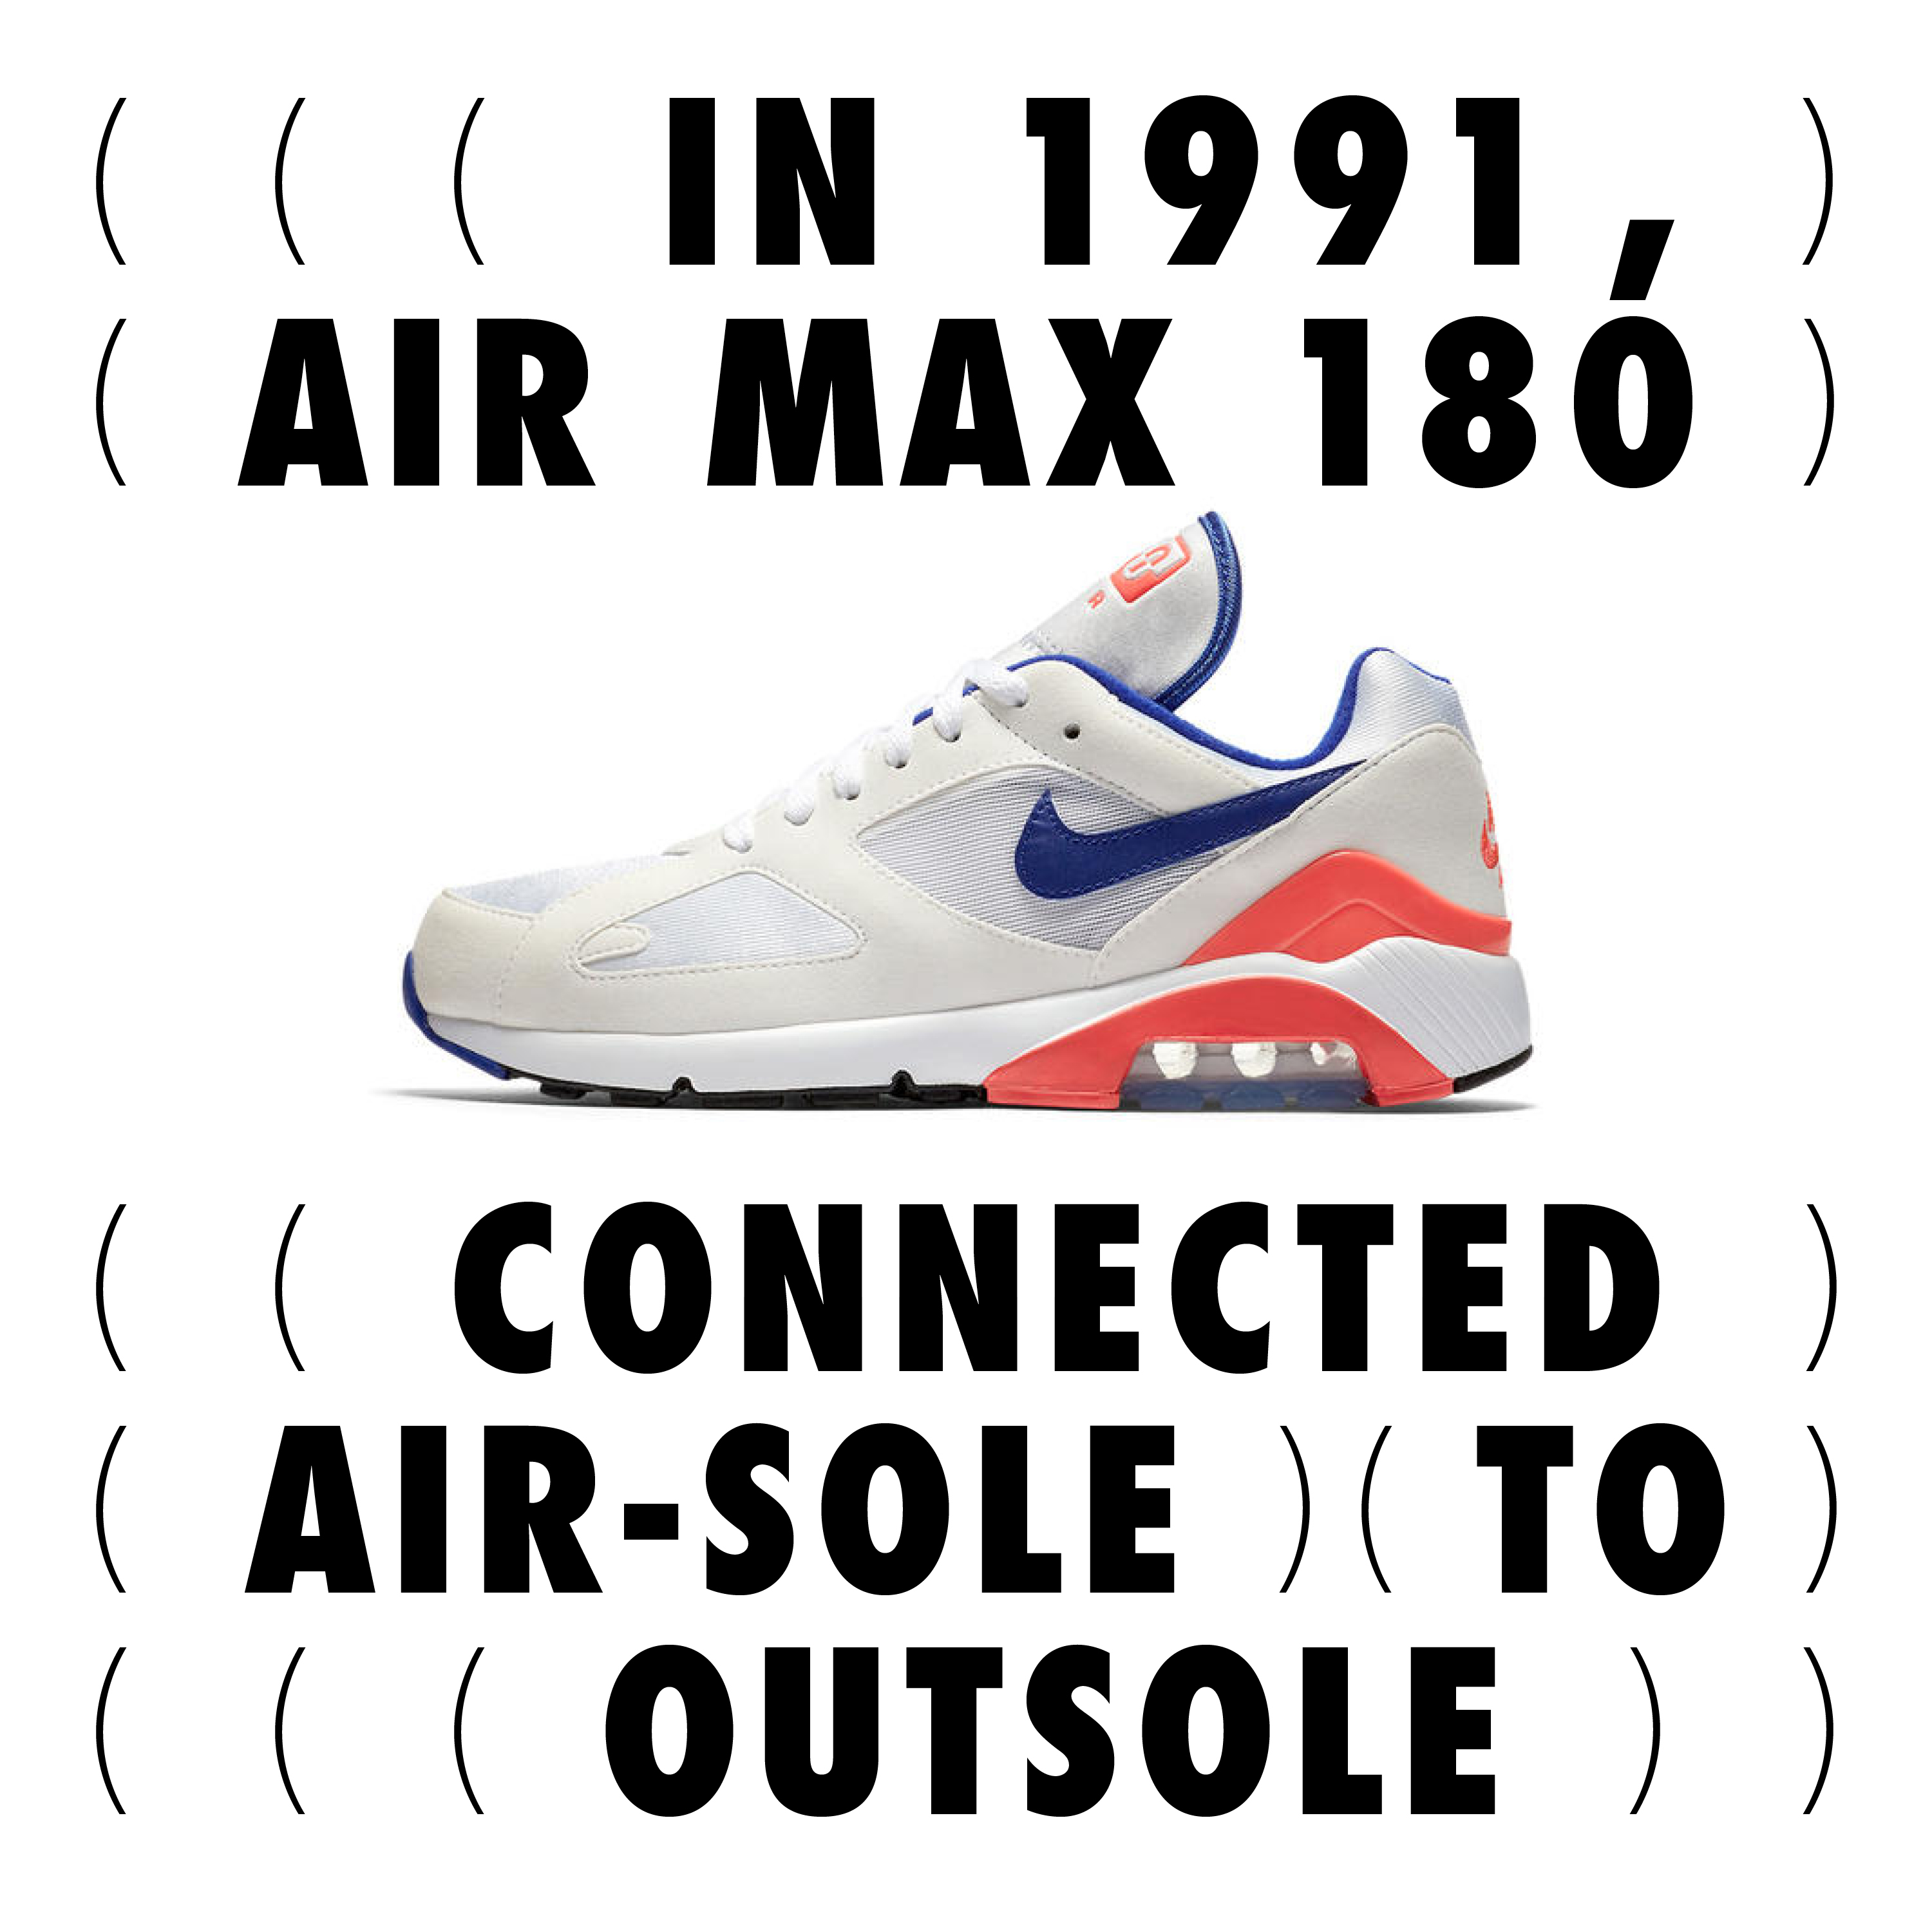 Air Max Day 2021 for Calling All Creators